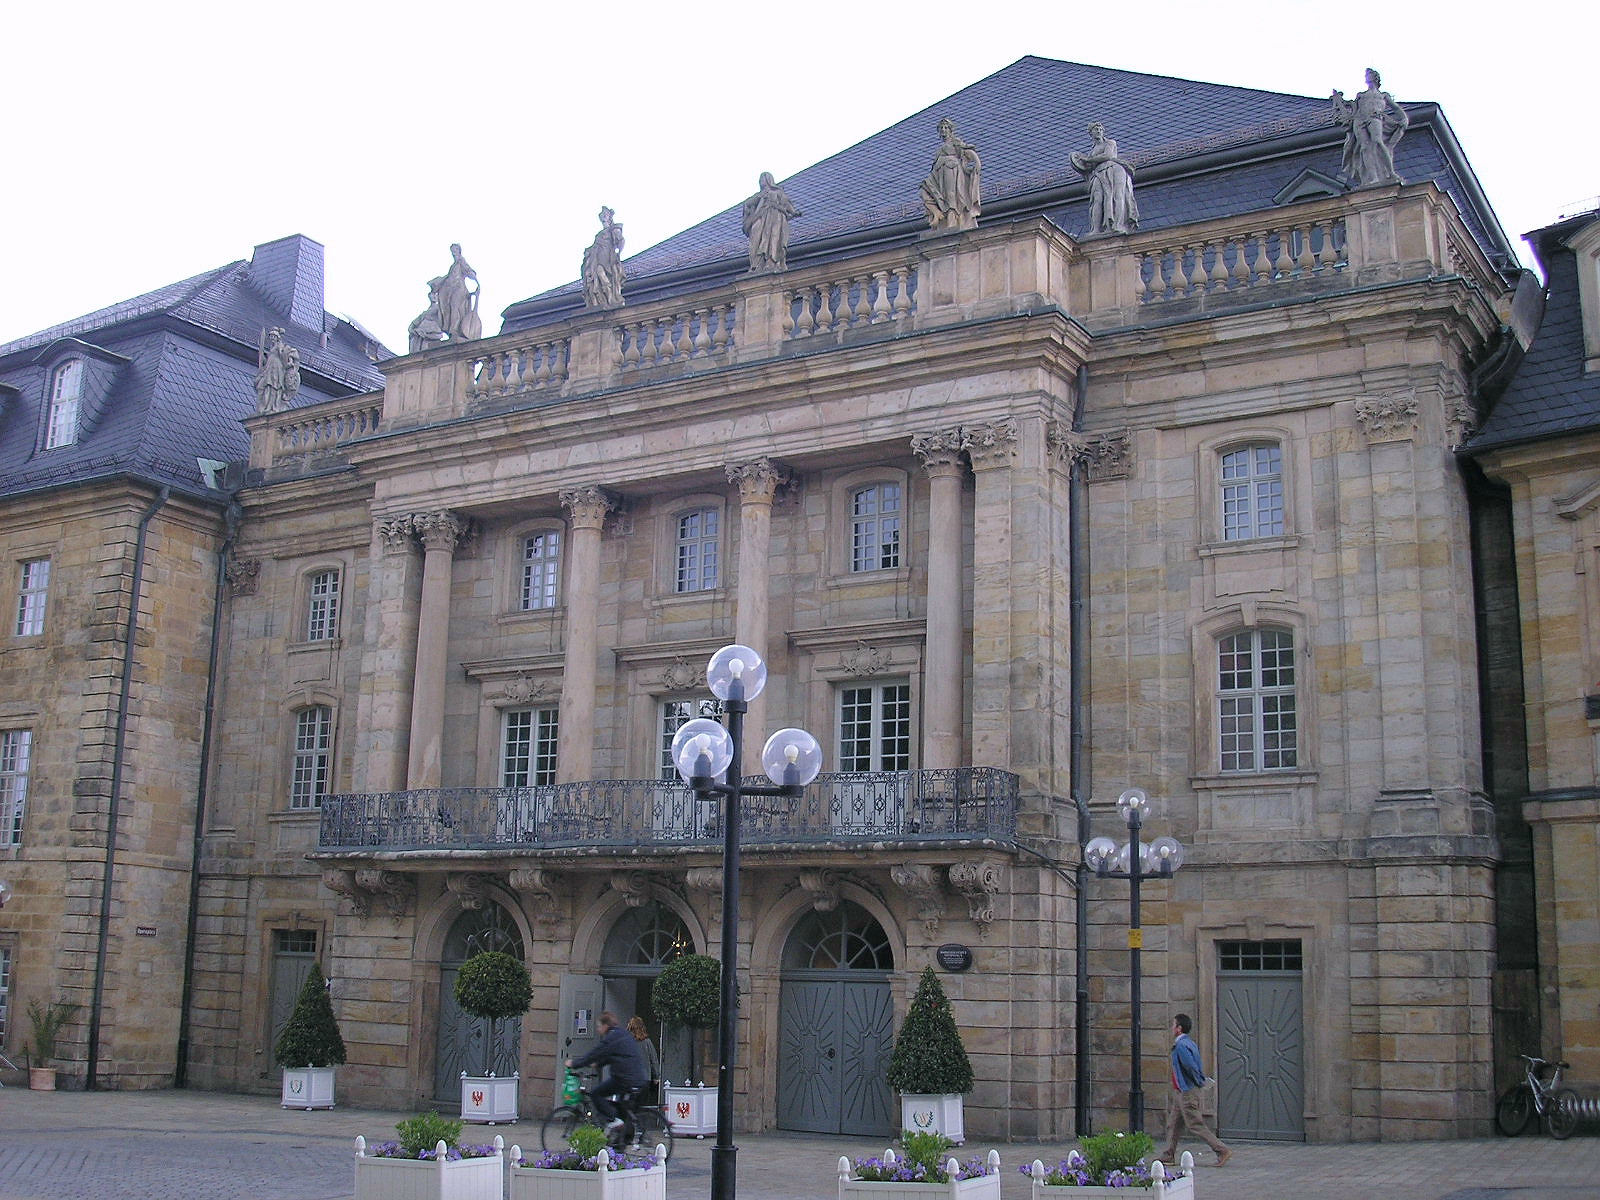 "Opernhaus Bayreuth" by Michael Sander - Own work. Licensed under CC BY-SA 3.0 via Wikimedia Commons - https://commons.wikimedia.org/wiki/File:Opernhaus_Bayreuth.jpg#/media/File:Opernhaus_Bayreuth.jpg